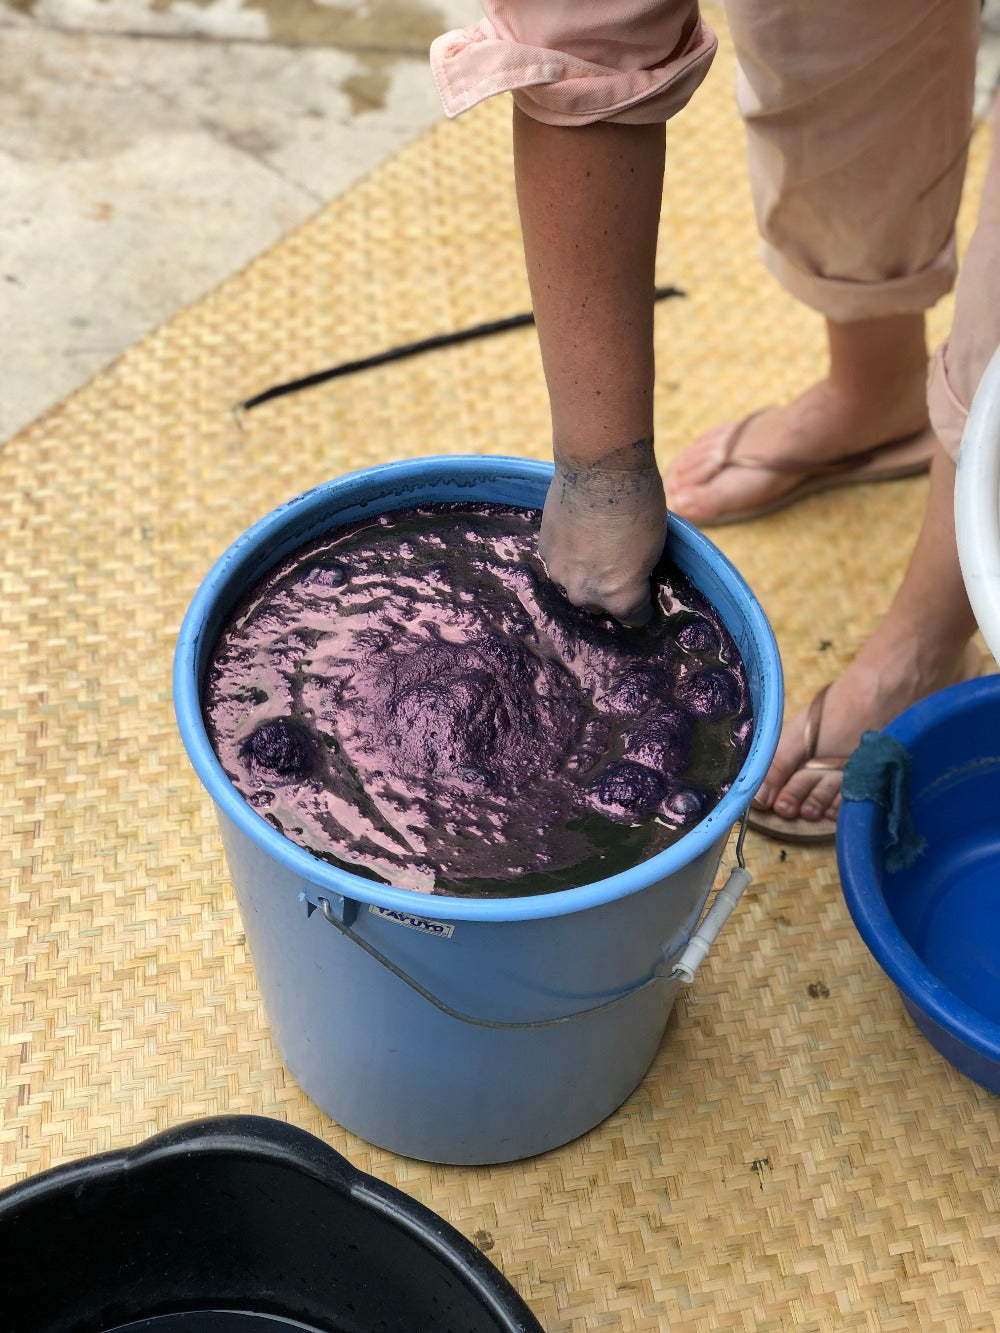 Private Class: Indigo-dyeing with Abigail / Contact us to schedule